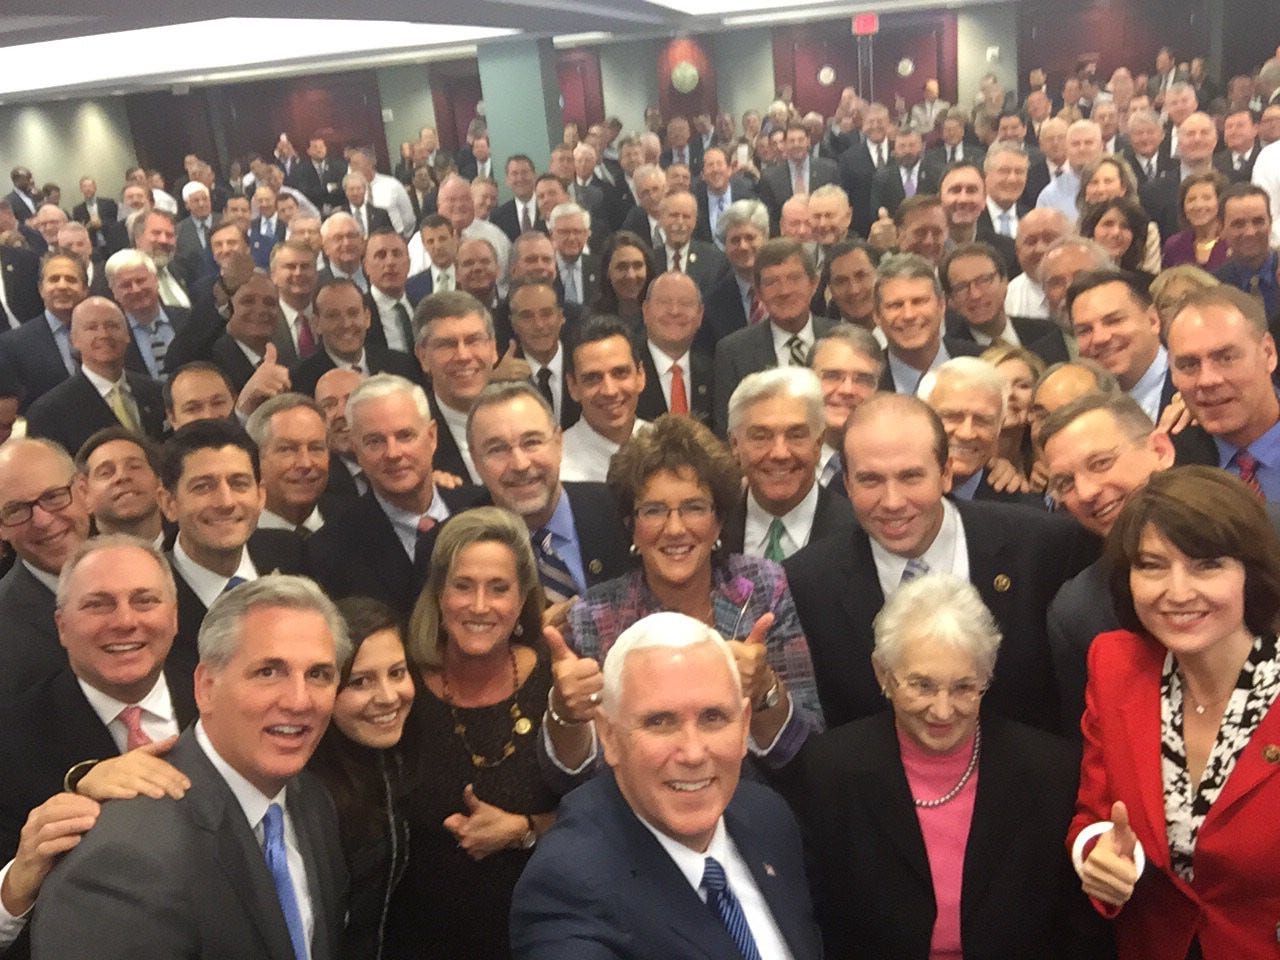 A photo of the (almost entirely white) Republican coalition. Mike Pence and congressional Republicans, shortly after the 2016 election.